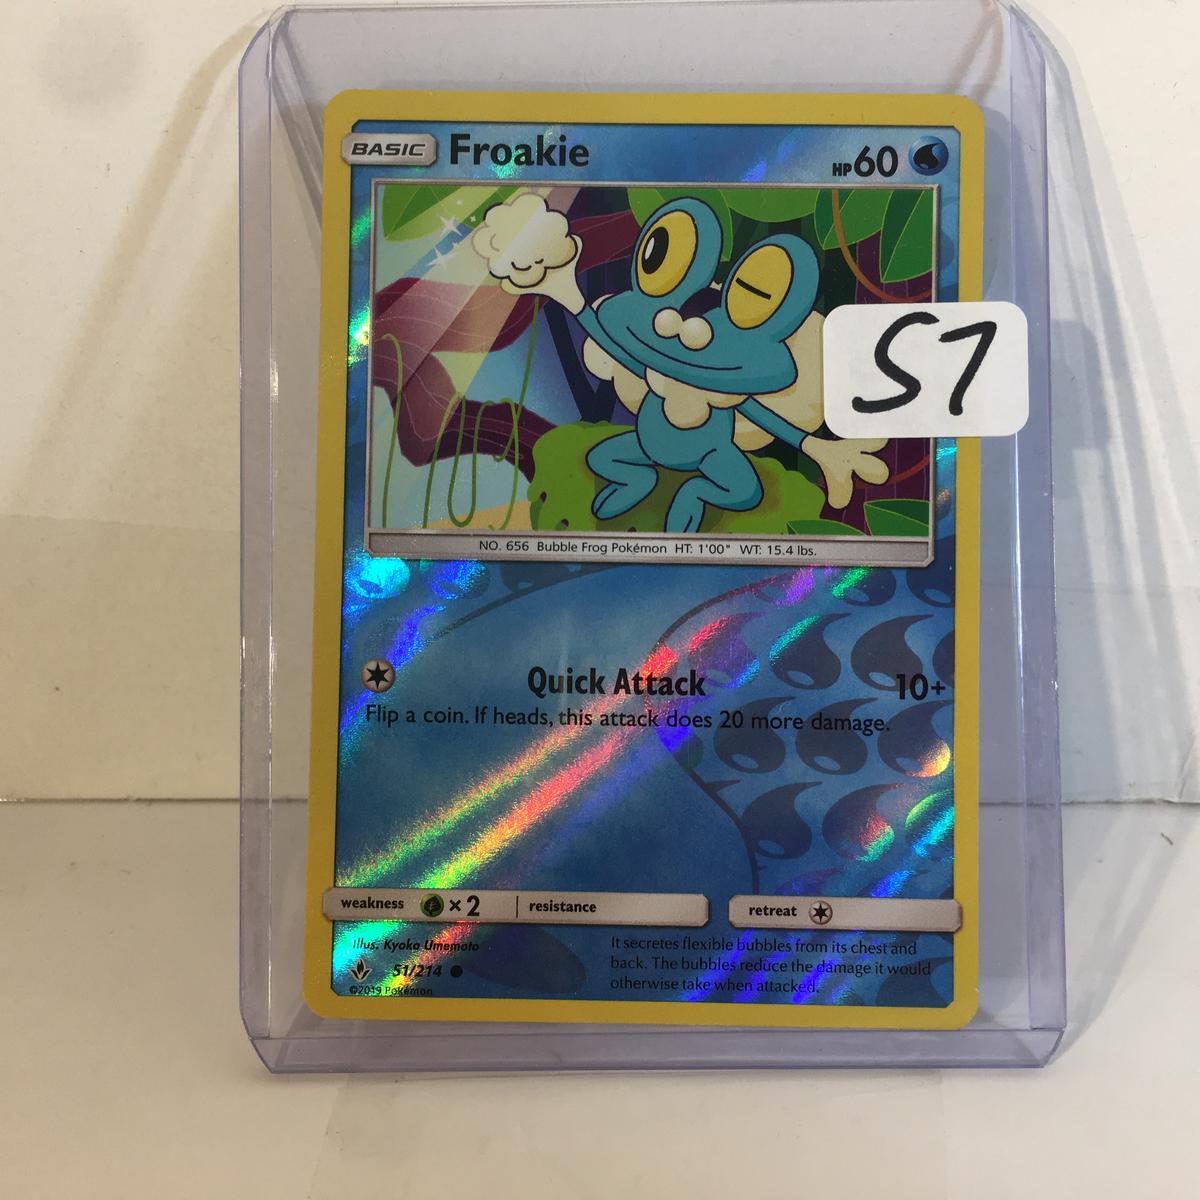 Collector Modern 2019 Pokemon TCG Basic Froakie HP60 Quick Attack Trading Game Card 51/214